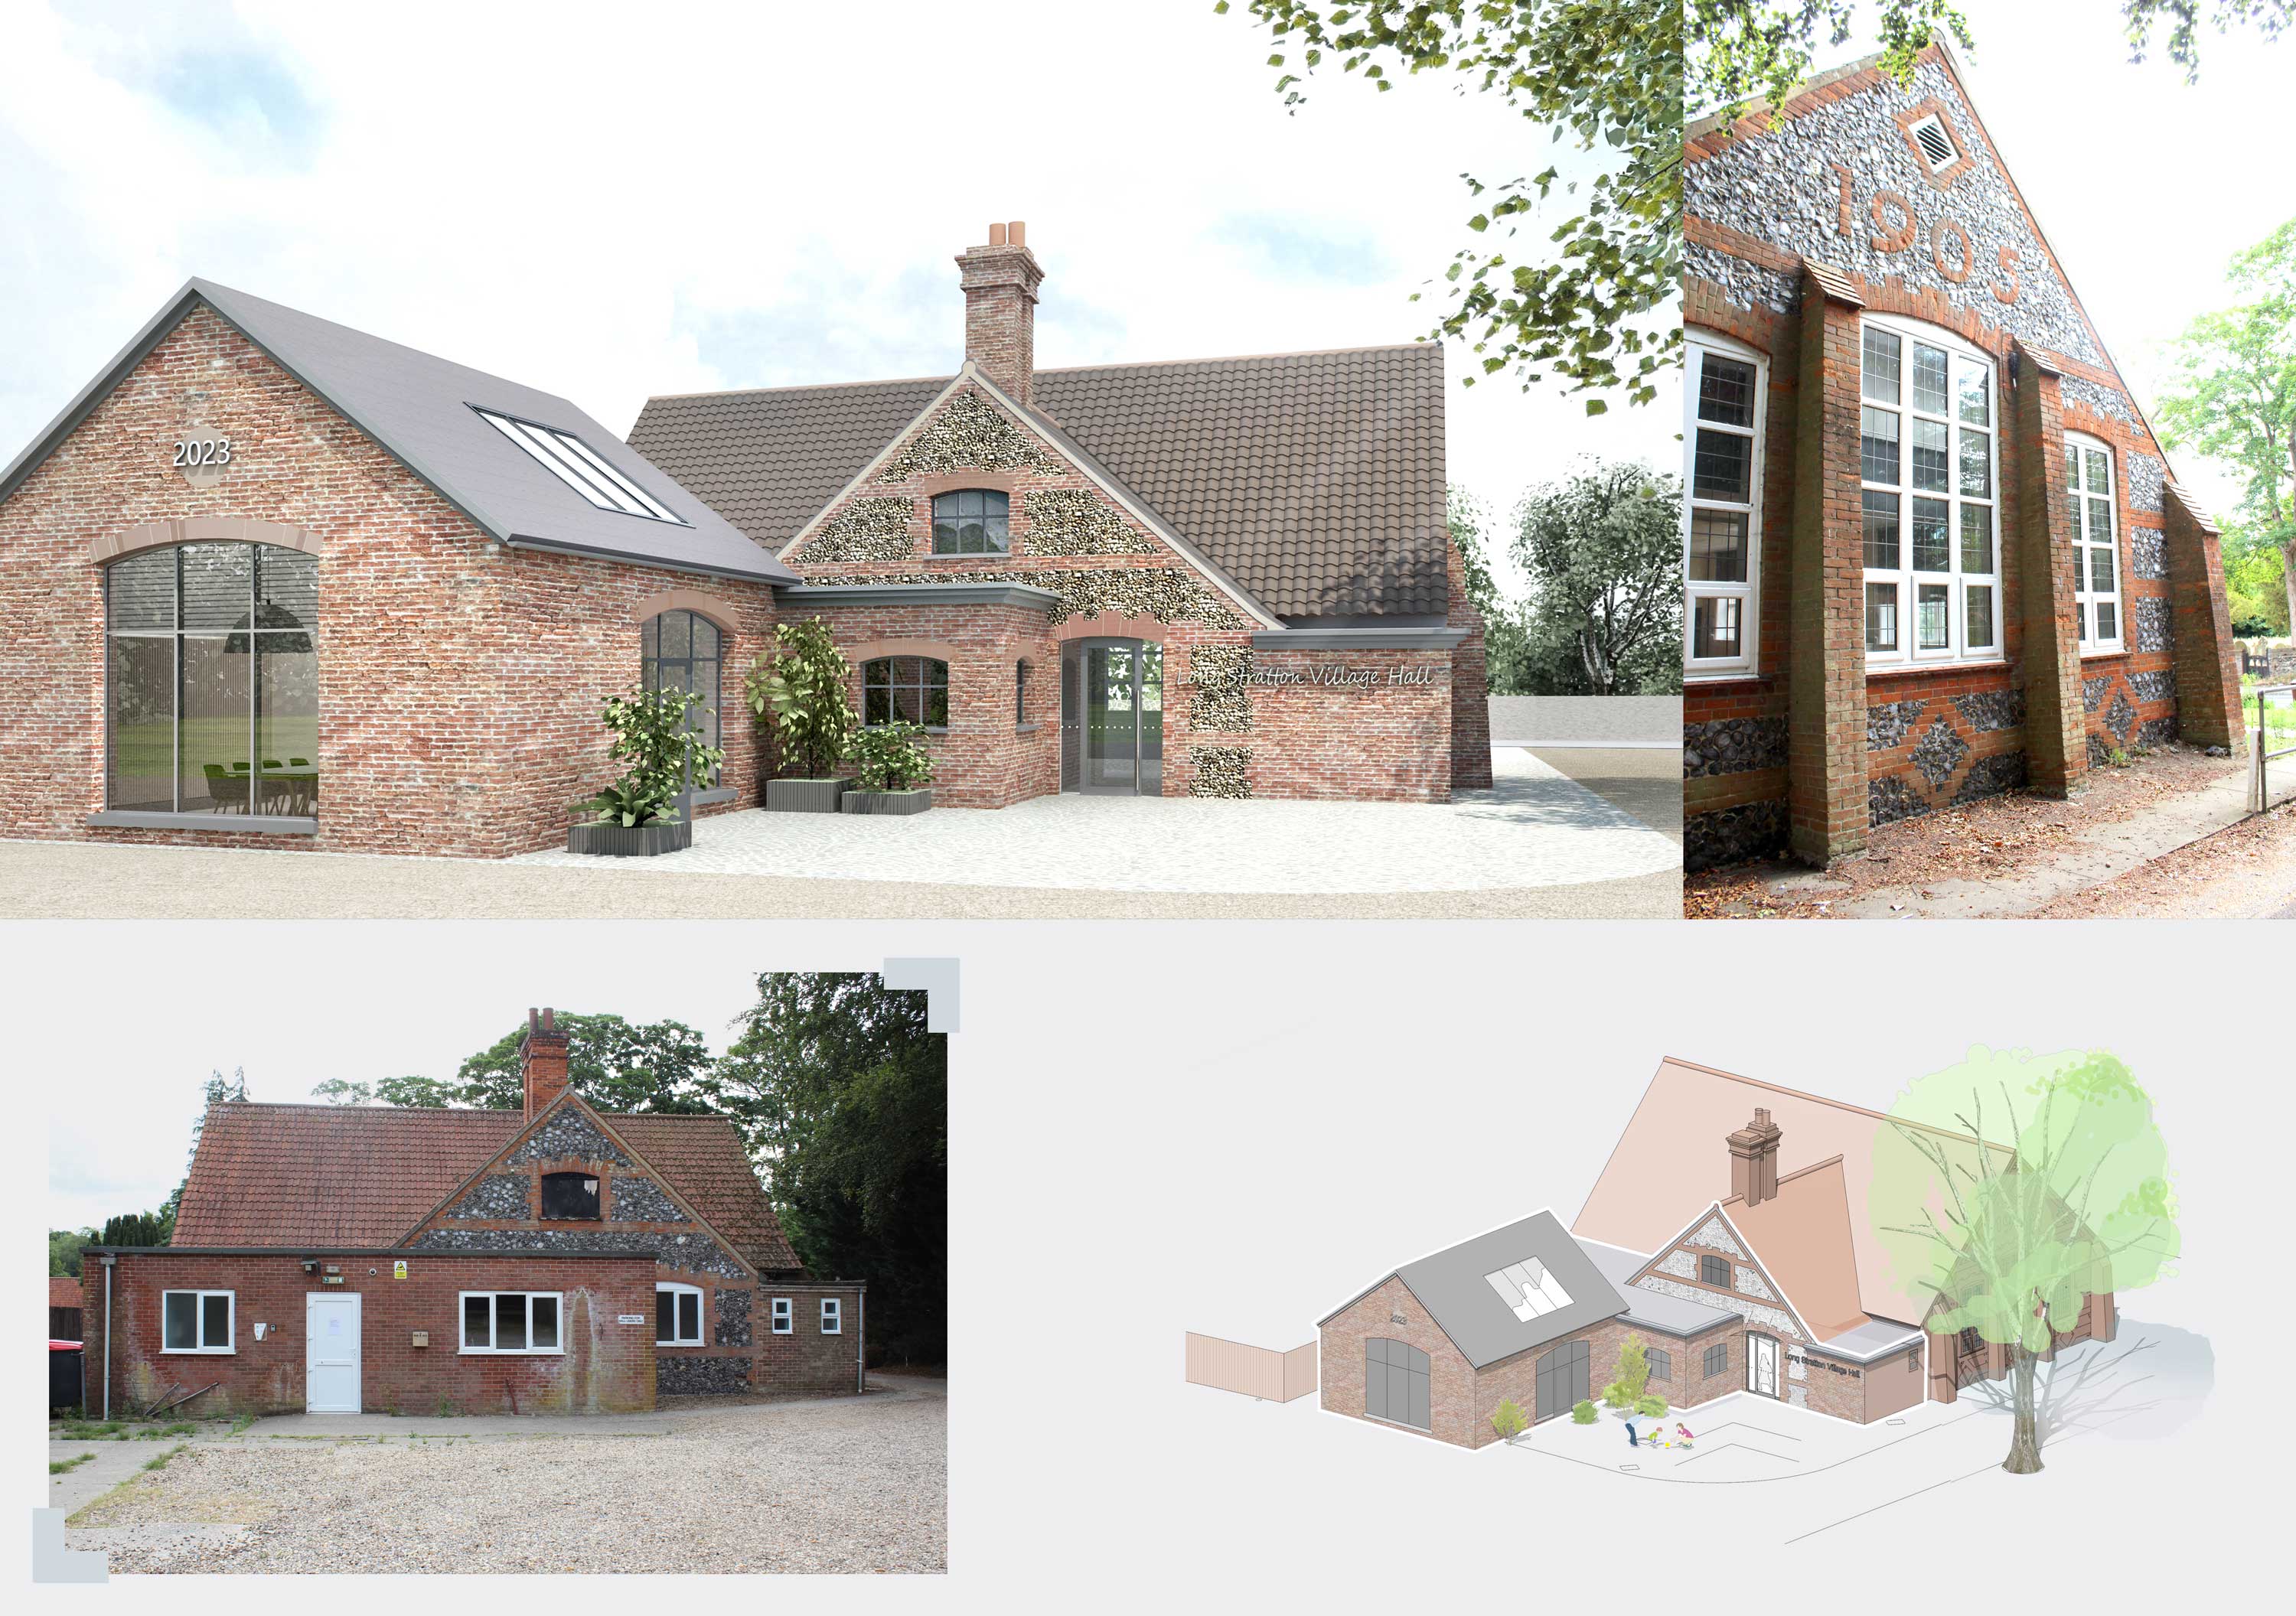 wilde and wilde planning permission for norfolk village hall